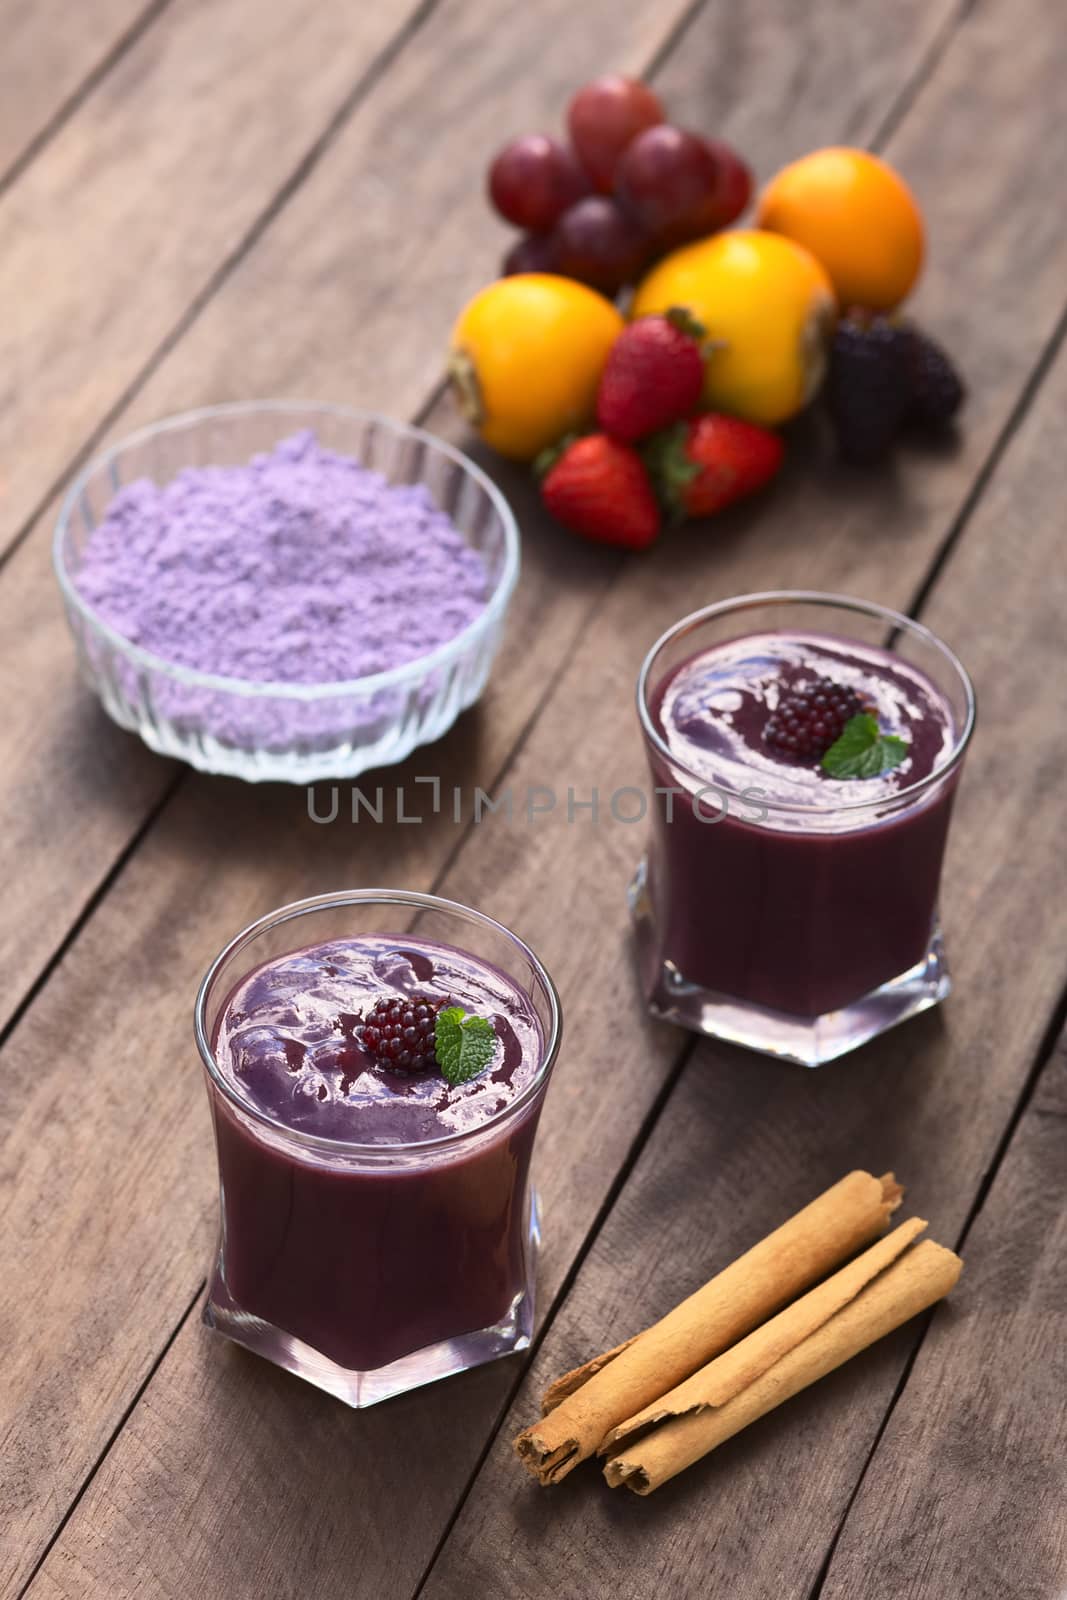 Ecuadorian traditional thick drink called Colada Morada, prepared by cooking purple corn flour and different fruits (for example strawberry, pineapple, naranjilla, grape, babaco, blackberry, etc) and seasoned with panela (cane sugar), cinnamon, allspice and cloves (Selective Focus, Focus on the blackberry on the first drink)